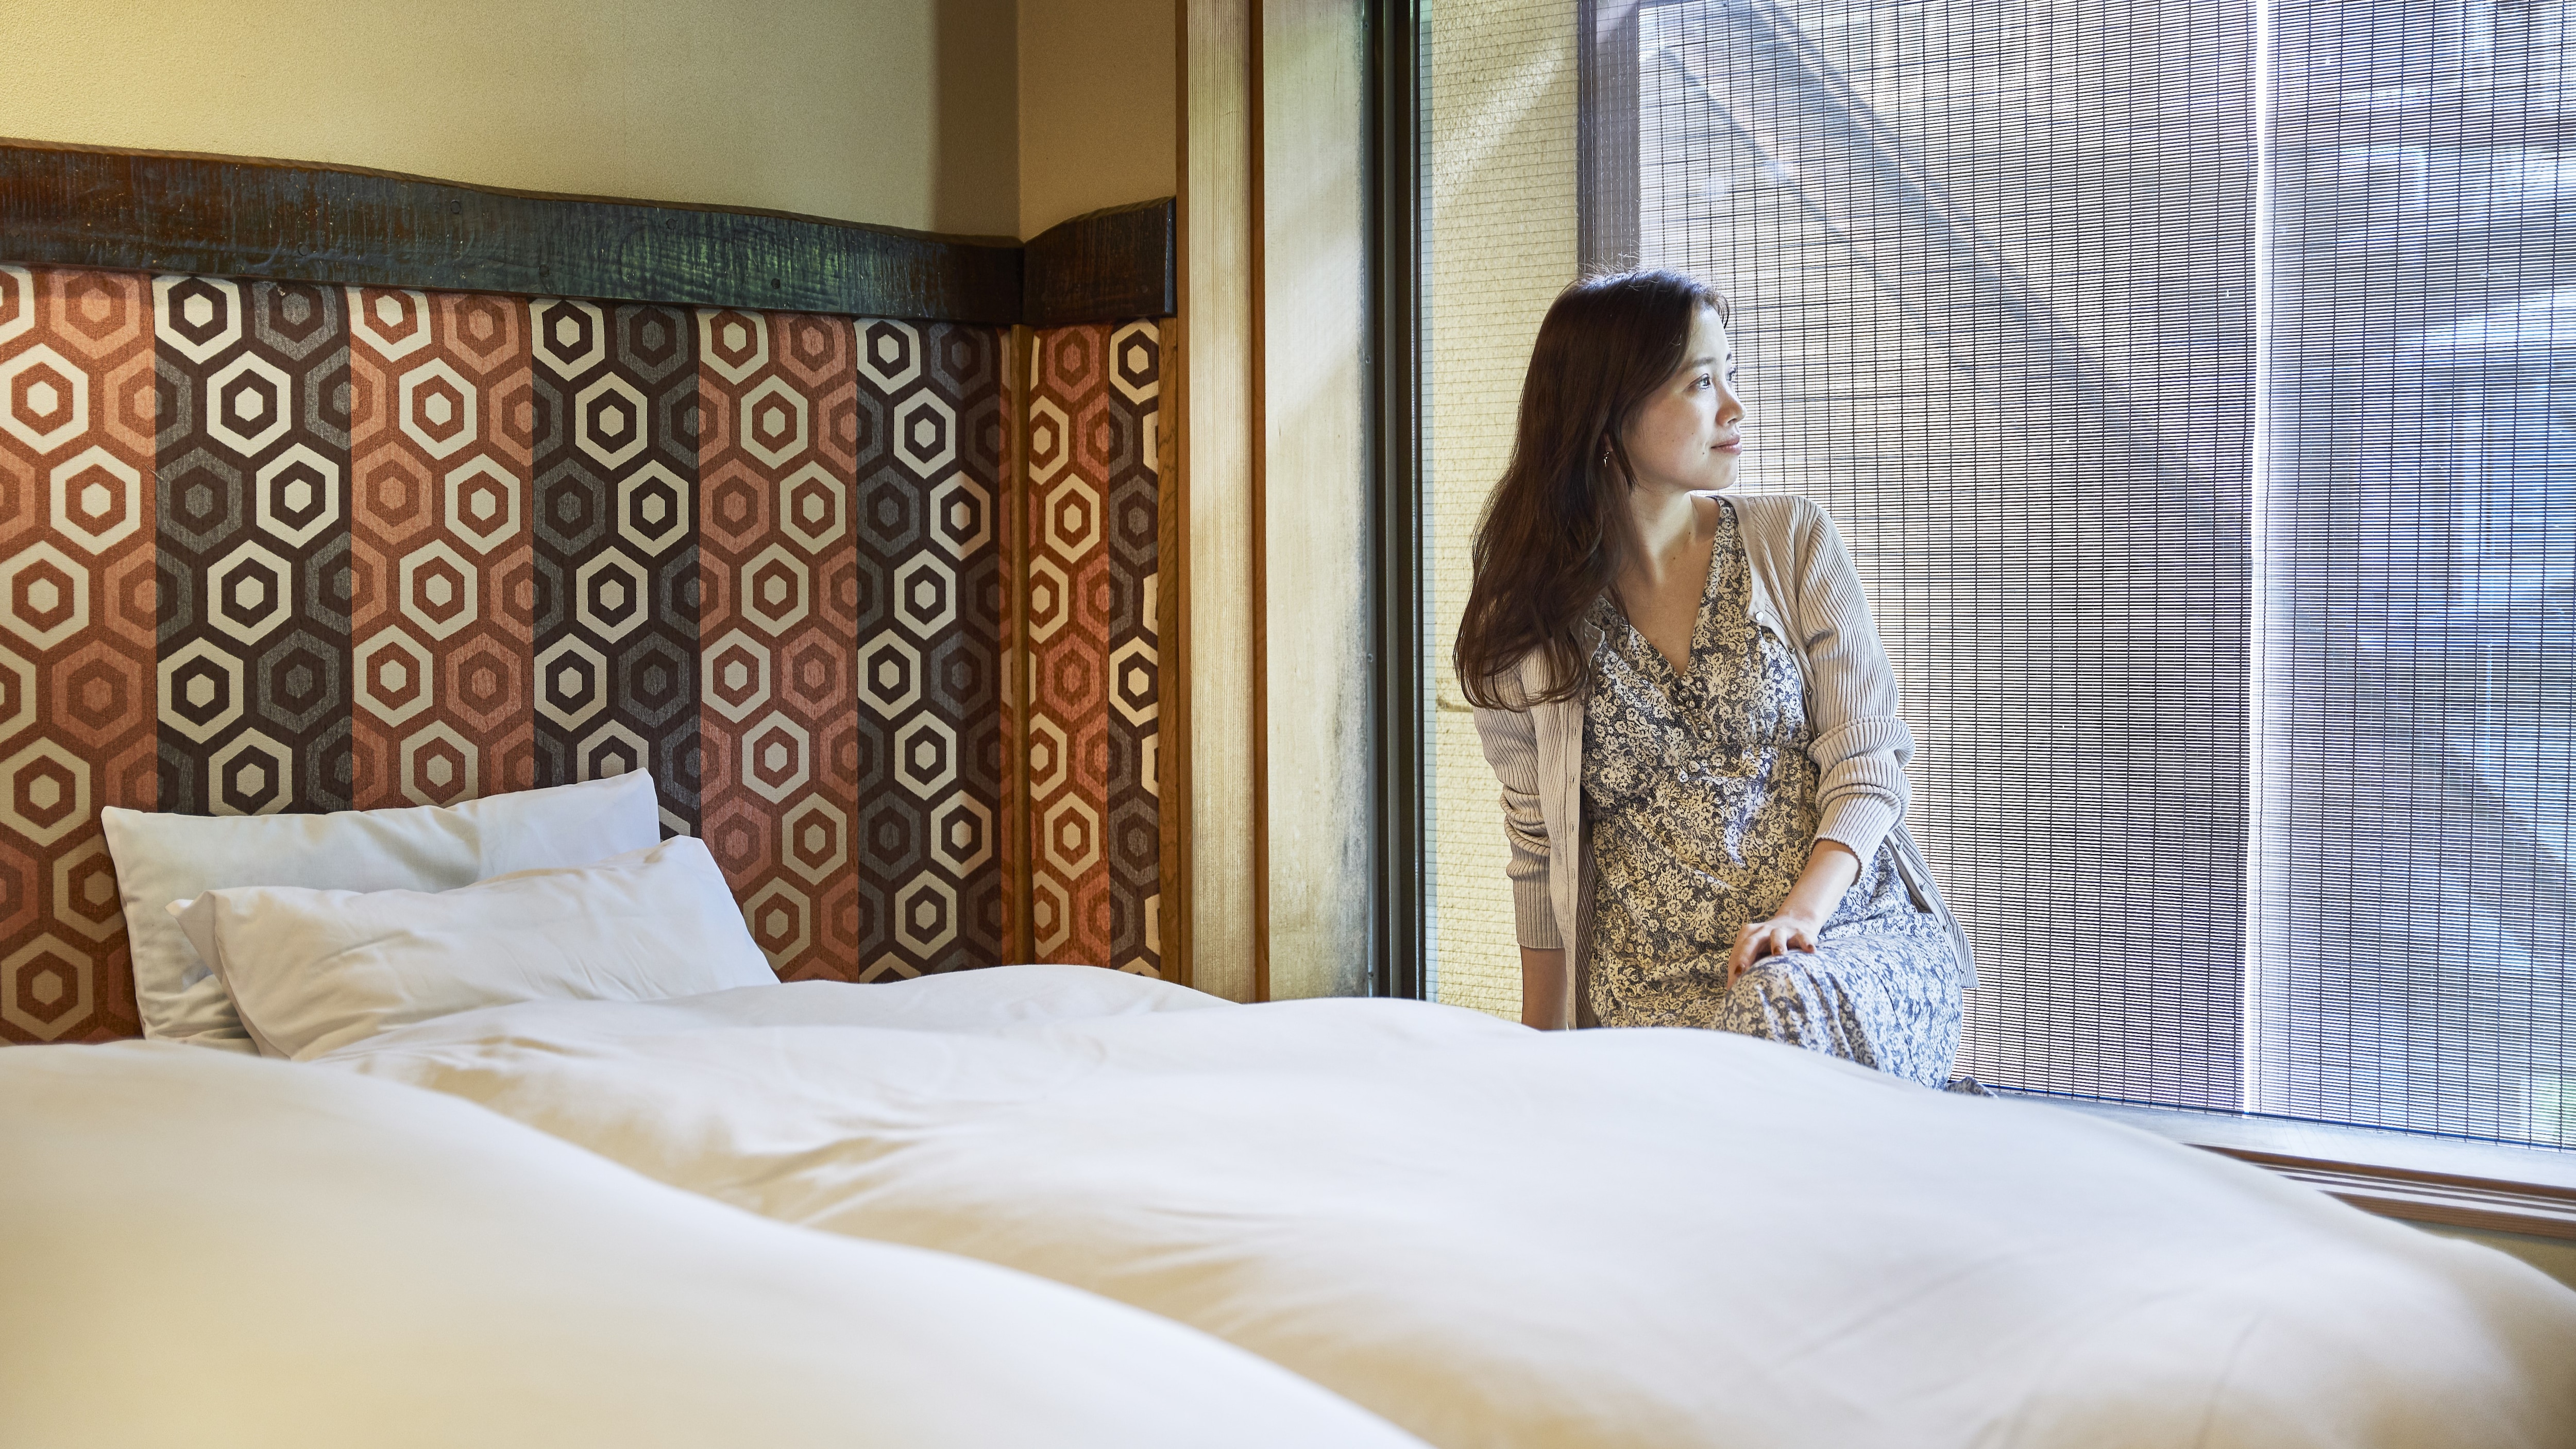 ・May 2023 Renewal "Sankirai" A room with twin beds and a private hot spring.